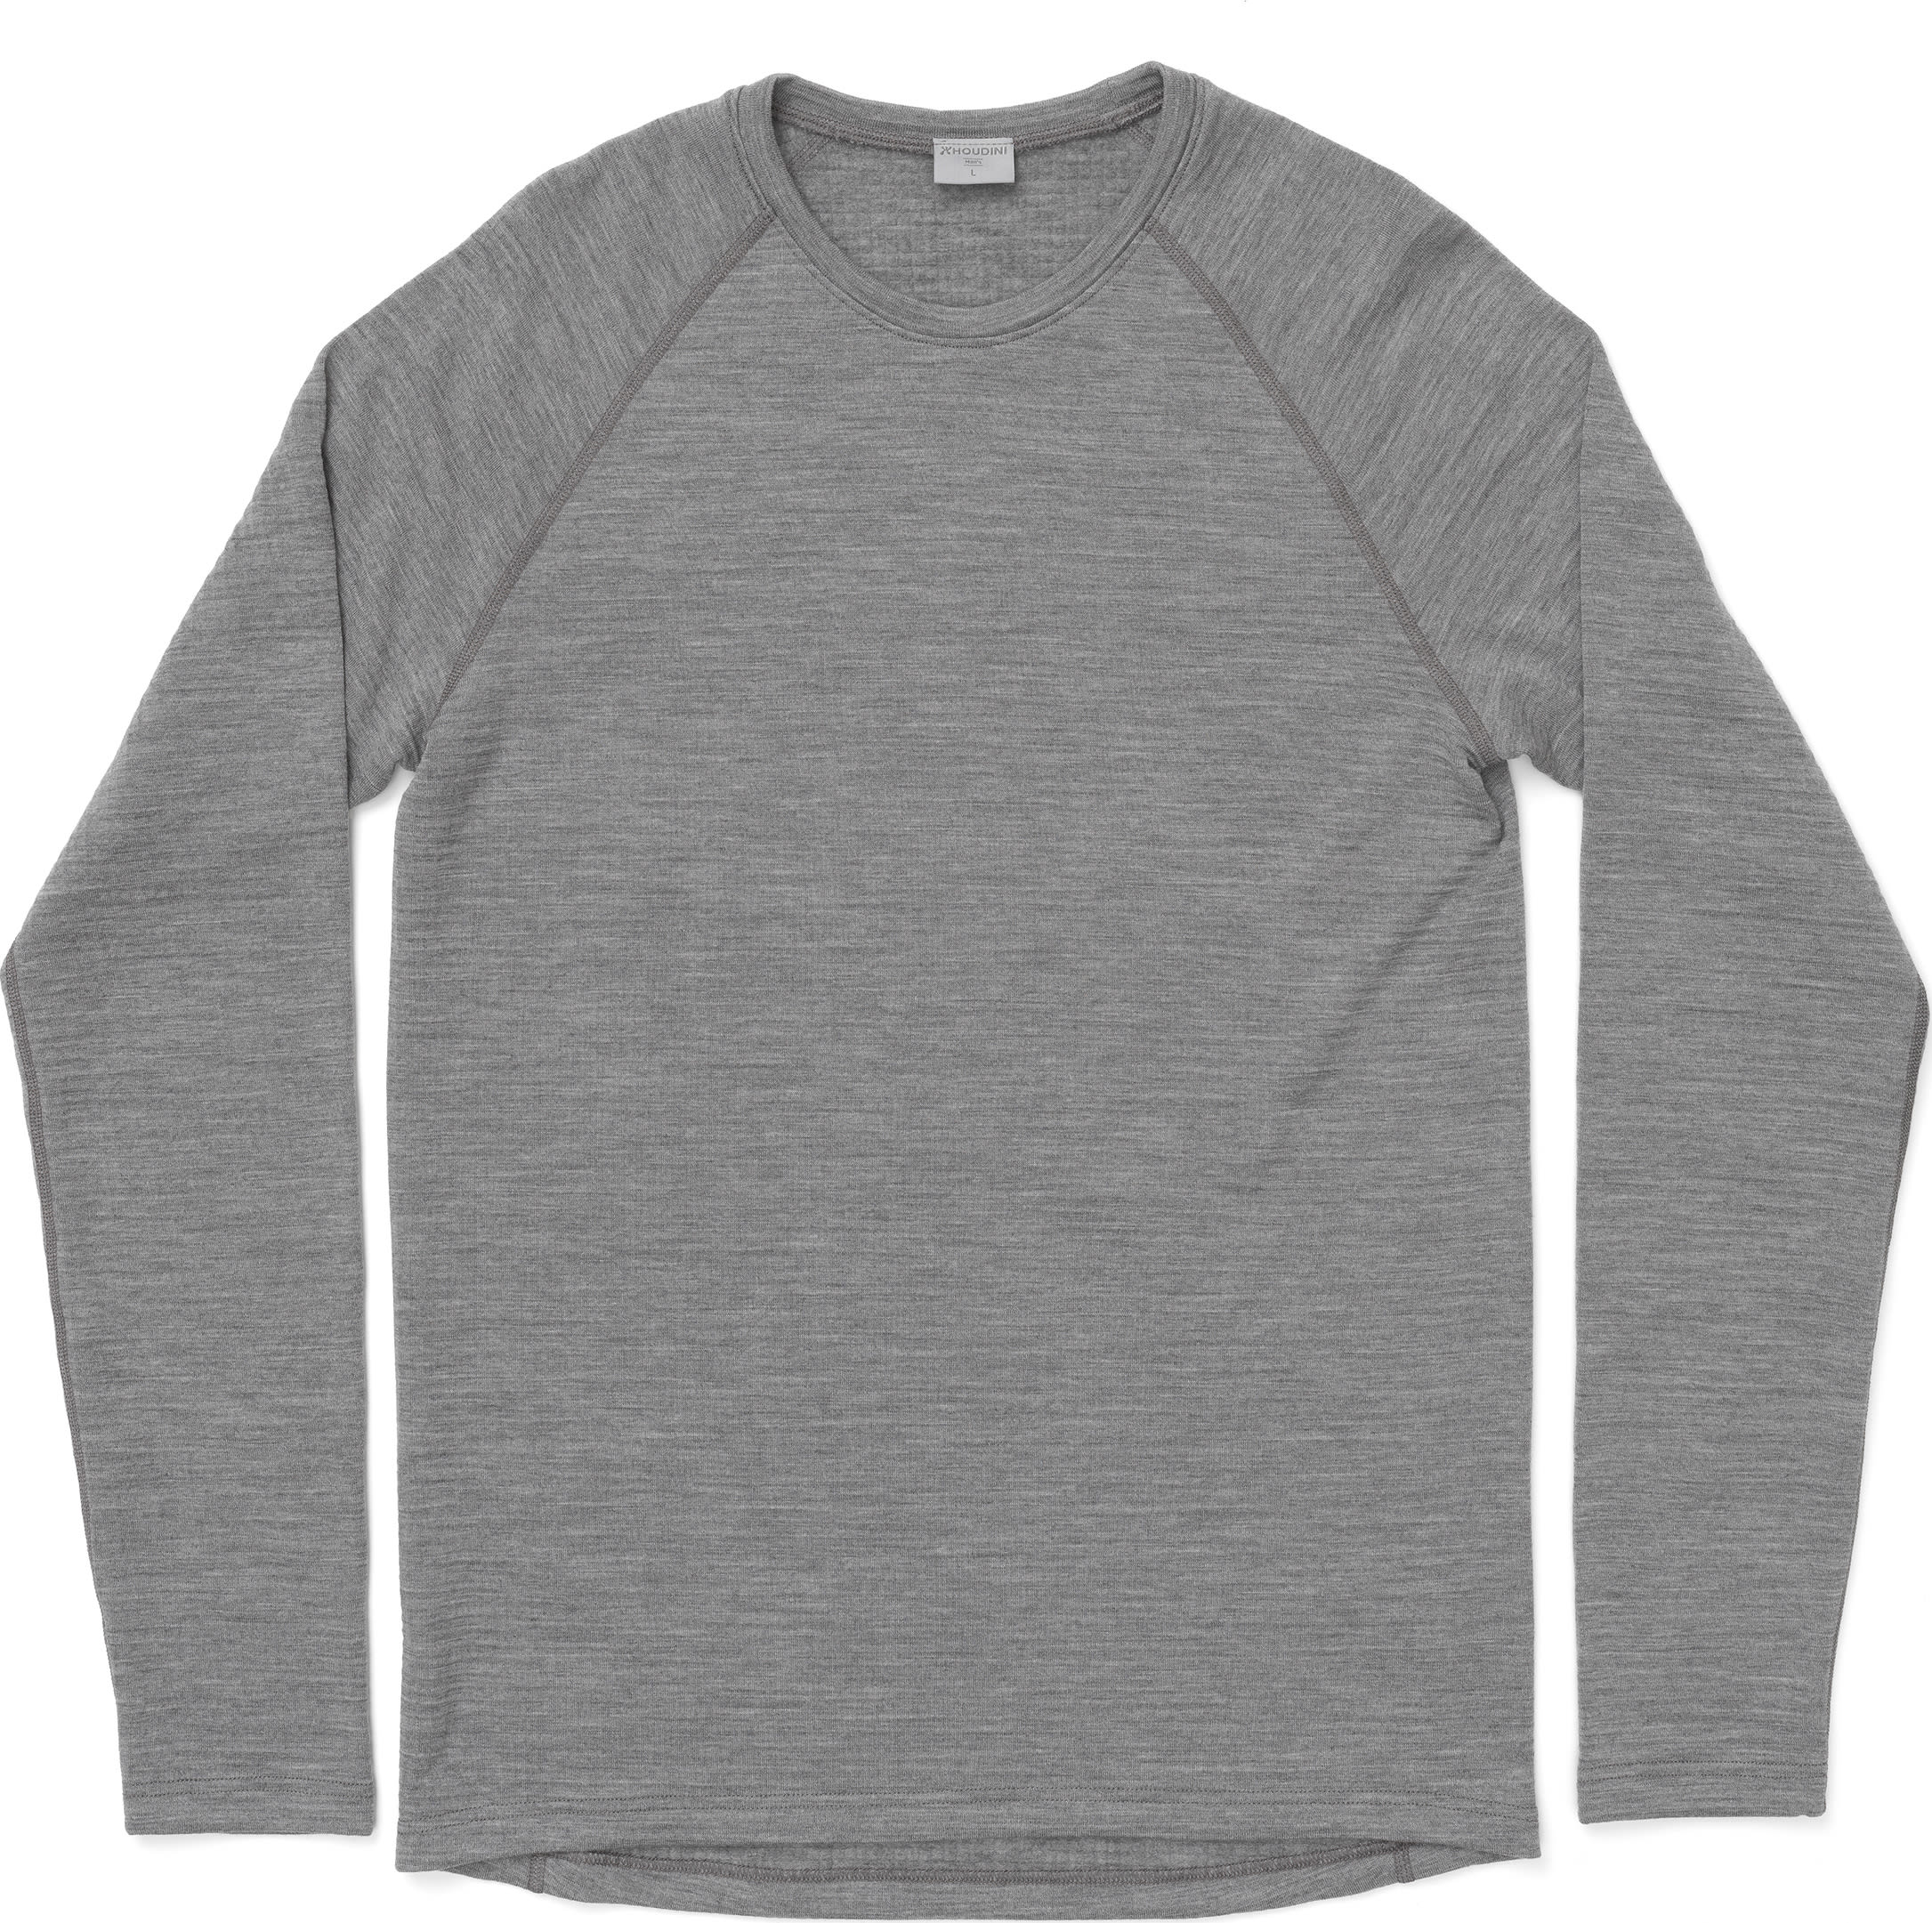 Buy Houdini Men's Desoli Thermal Crew from Outnorth